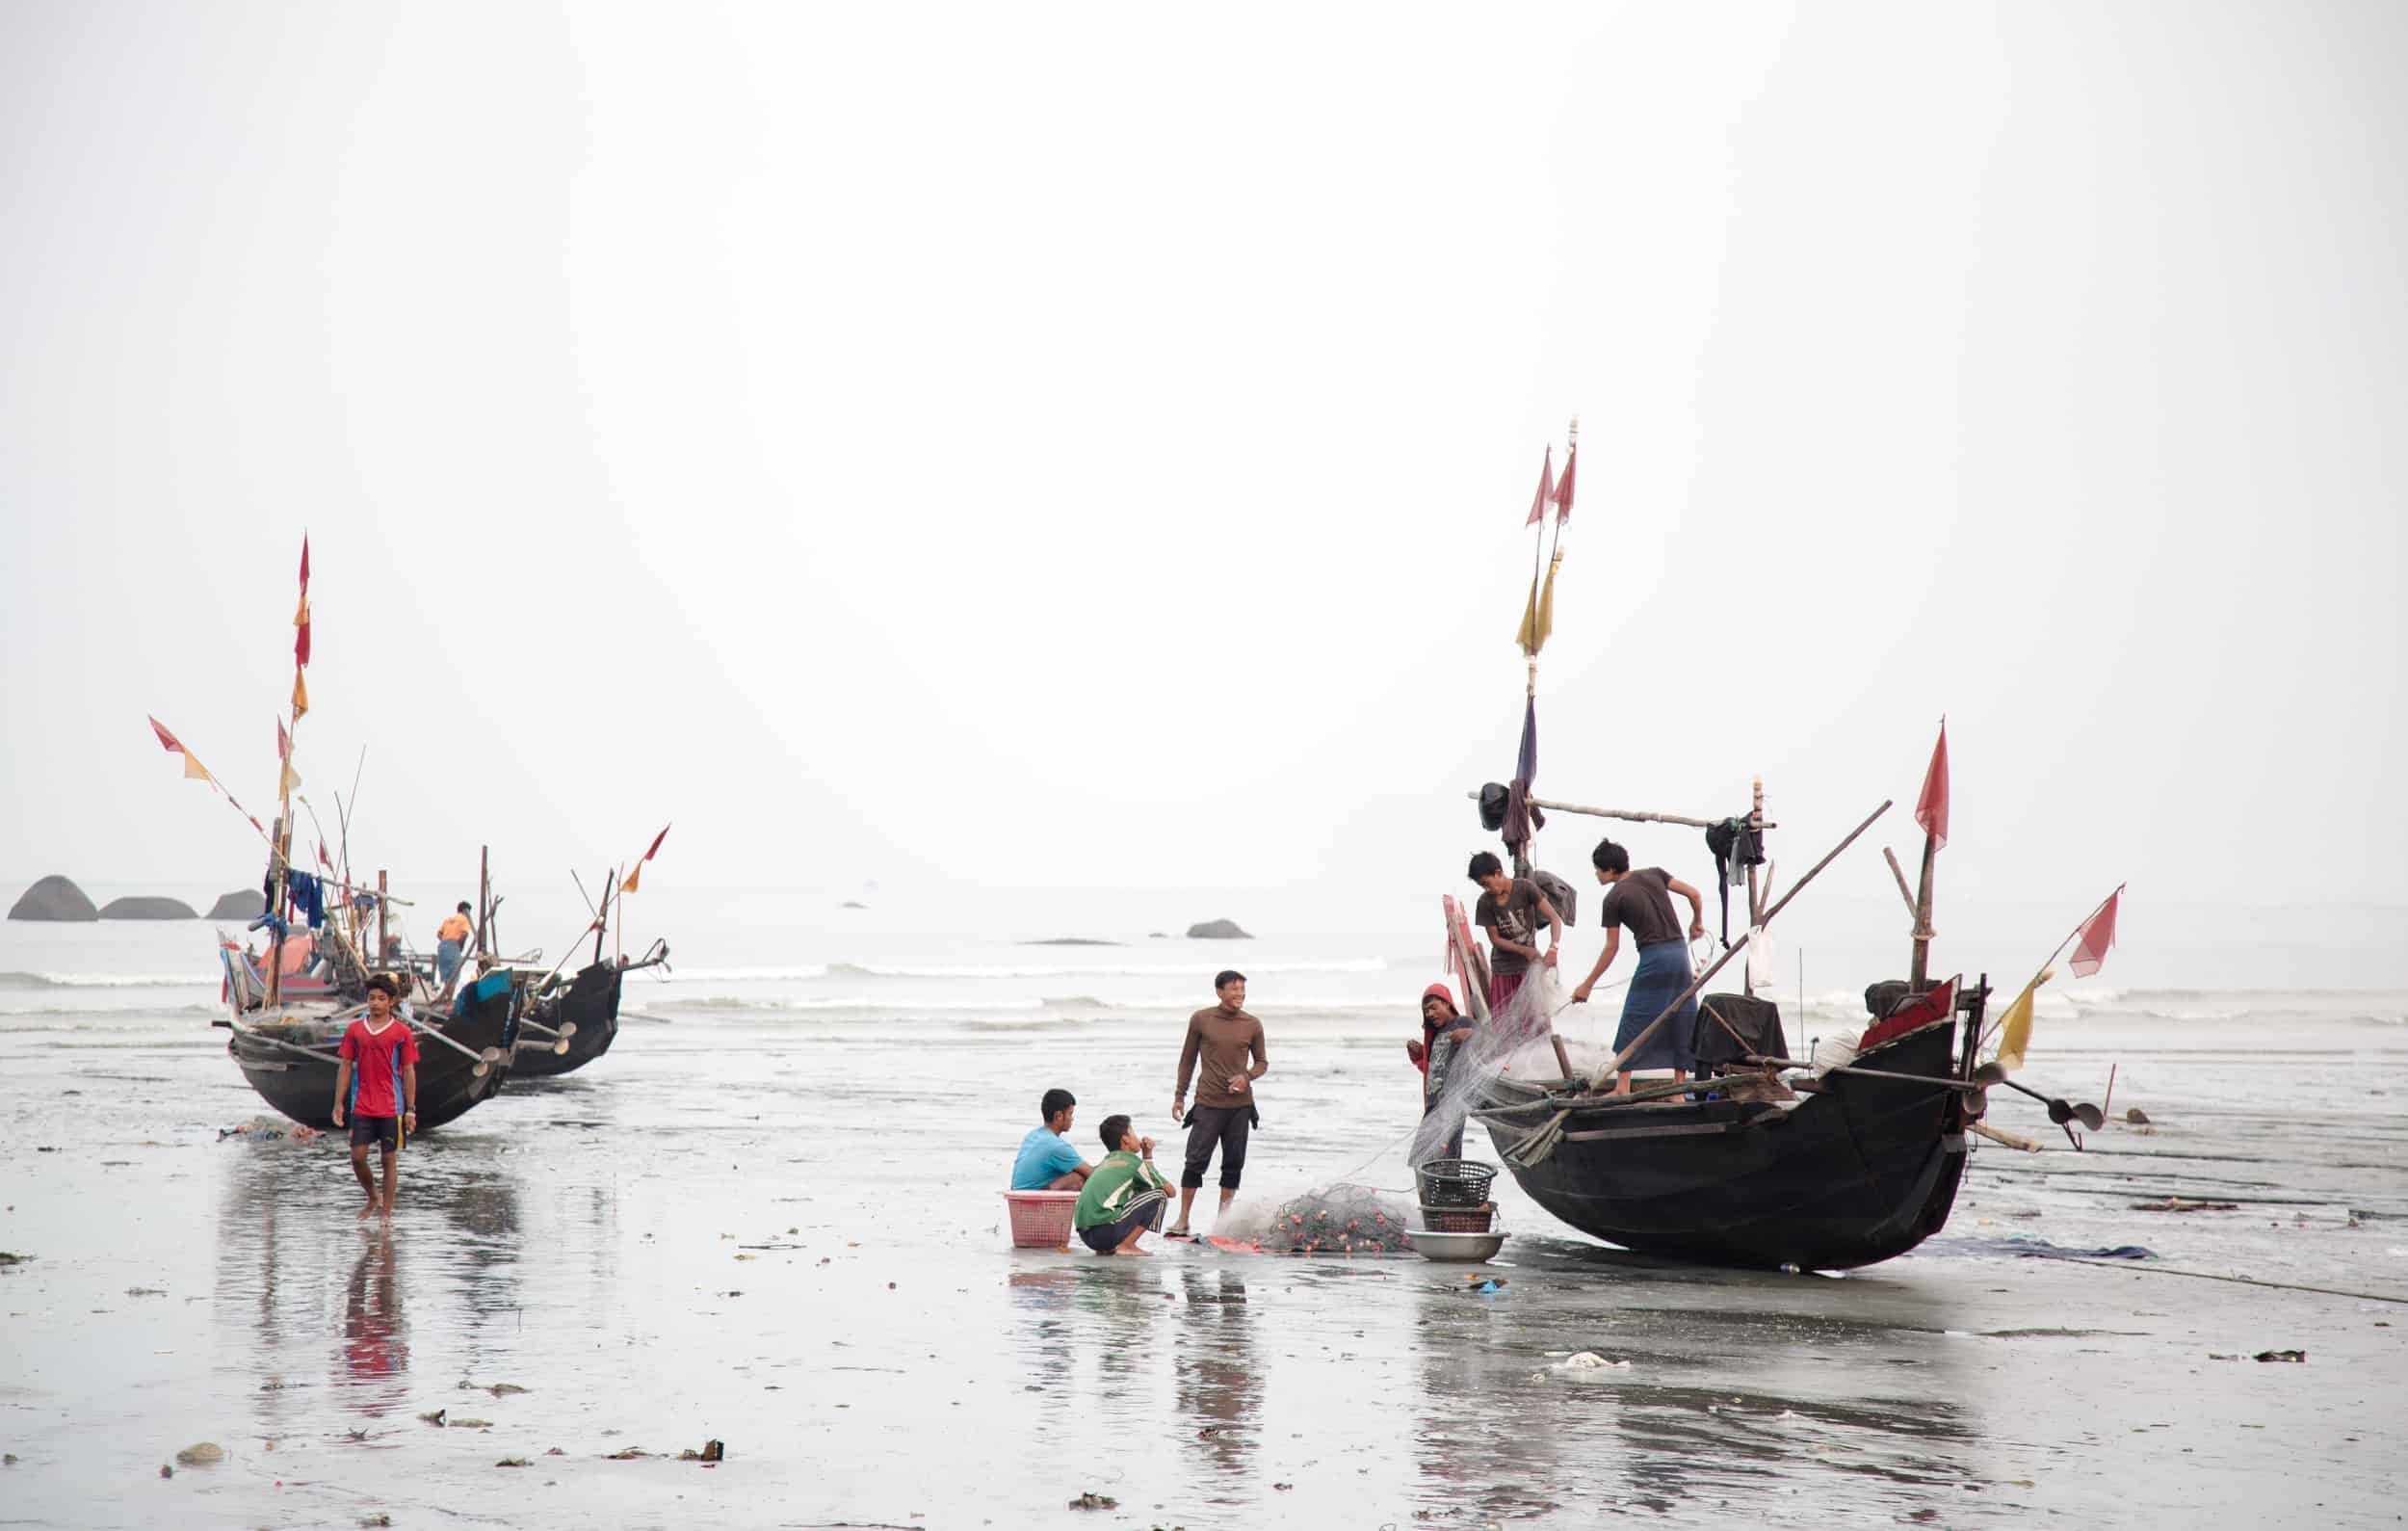 Fishers near Dawei Special Economic Zone unload their catch at a local beach market. Local fisheries and this market would both be threatened by the proposed Dawei deep sea port.